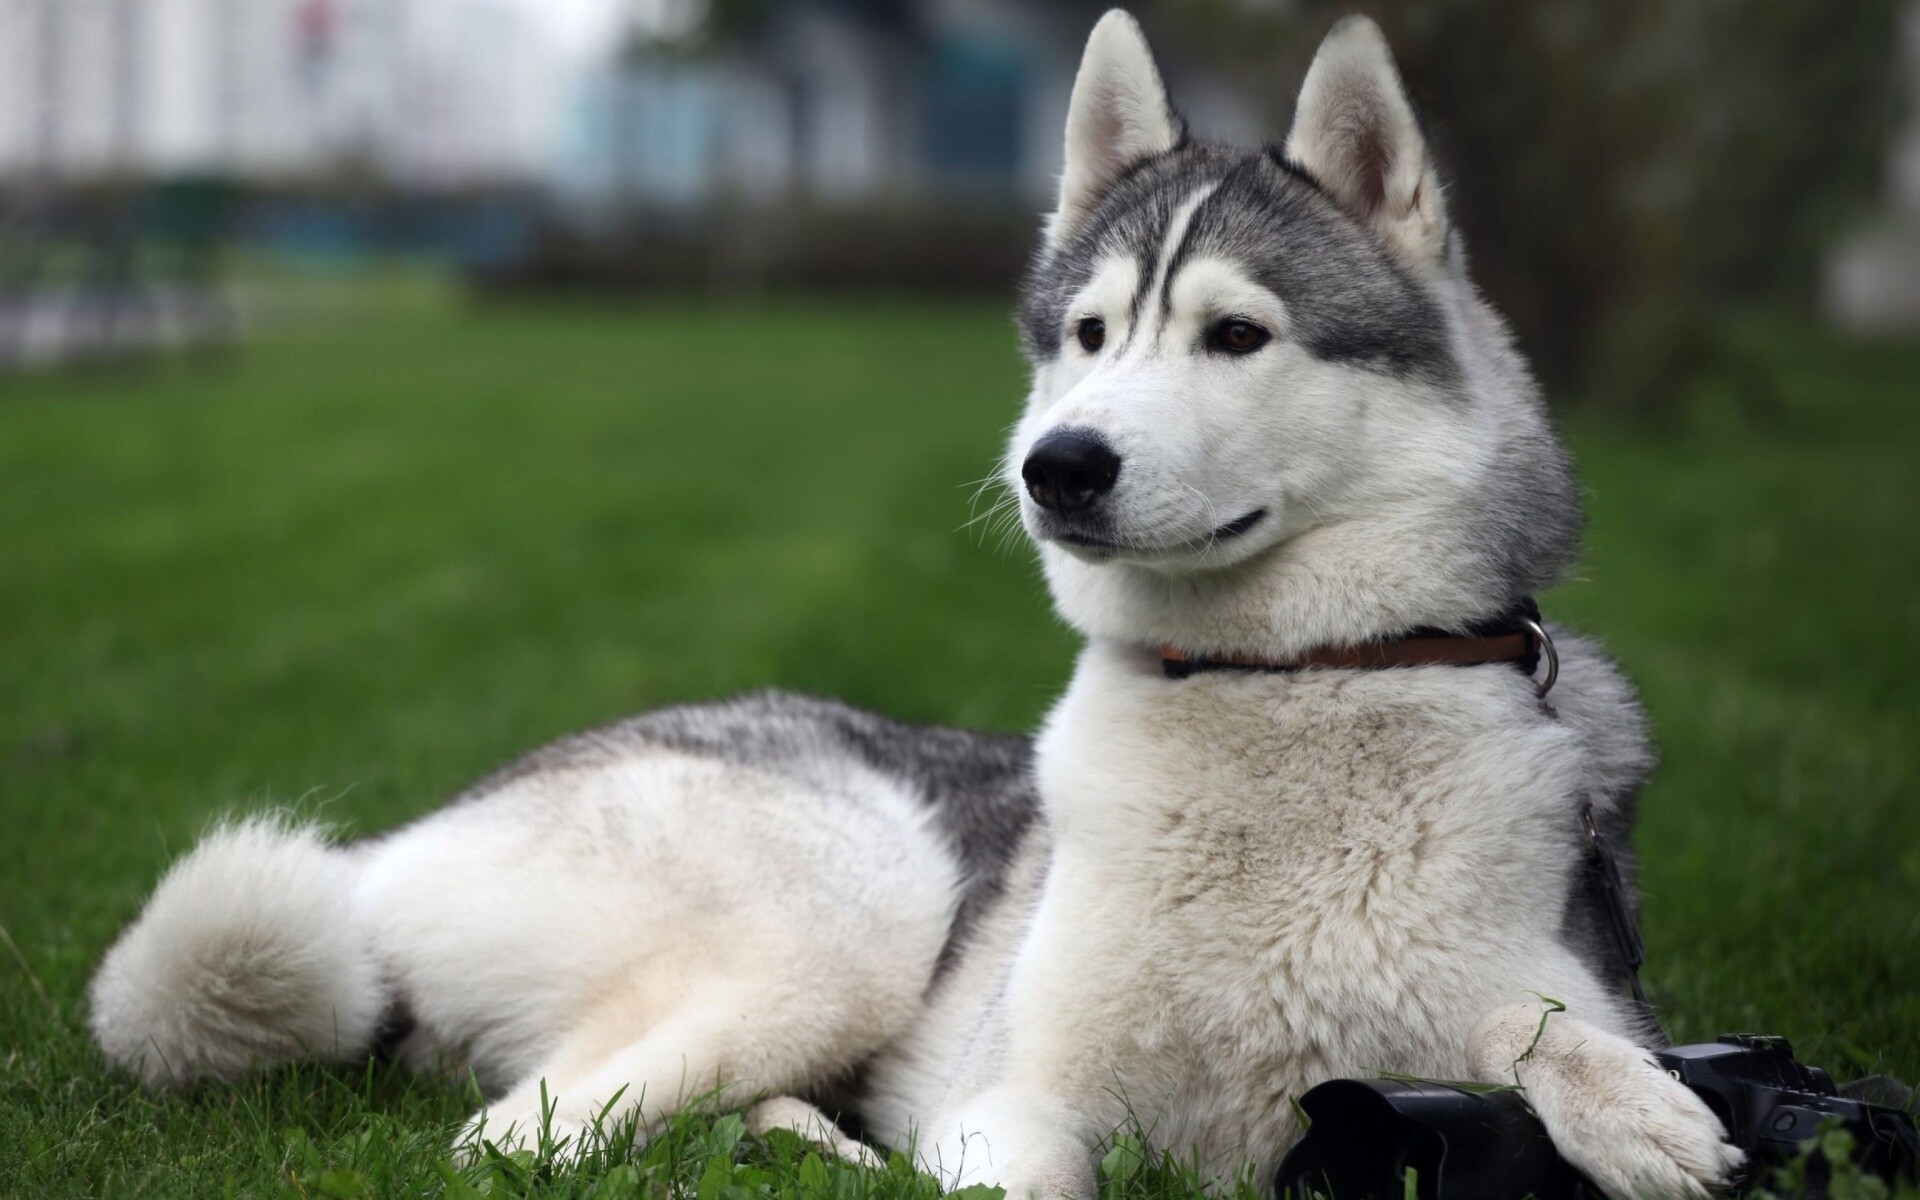 Siberian Husky: The 12th most popular breed in the United States, according to the AKC. 1920x1200 HD Wallpaper.